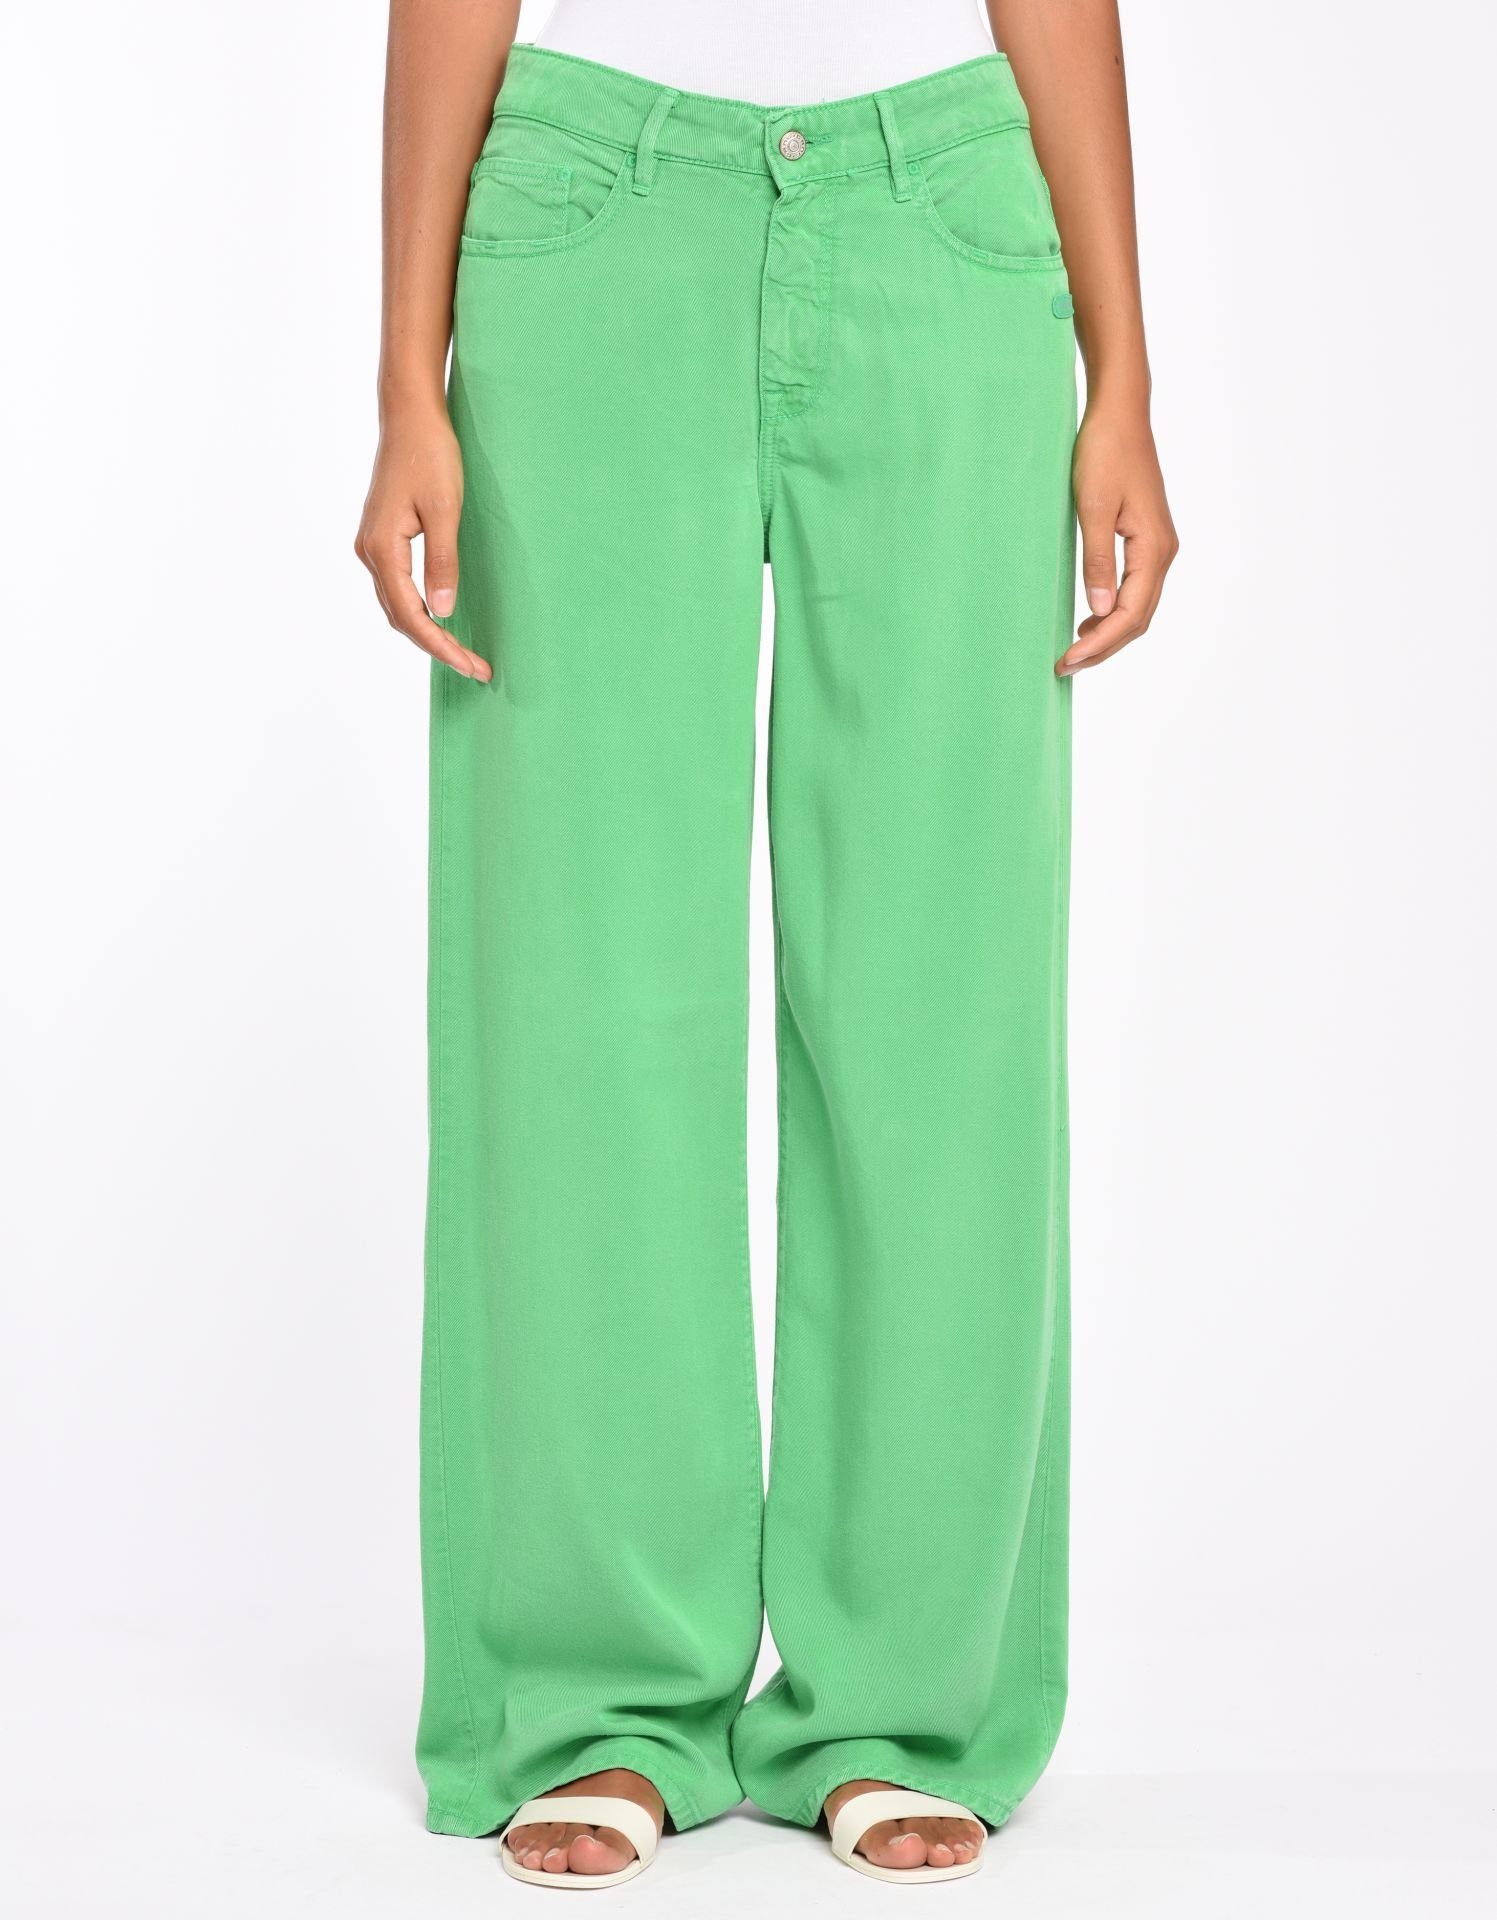 GANG Weite Jeans 6621 bright green